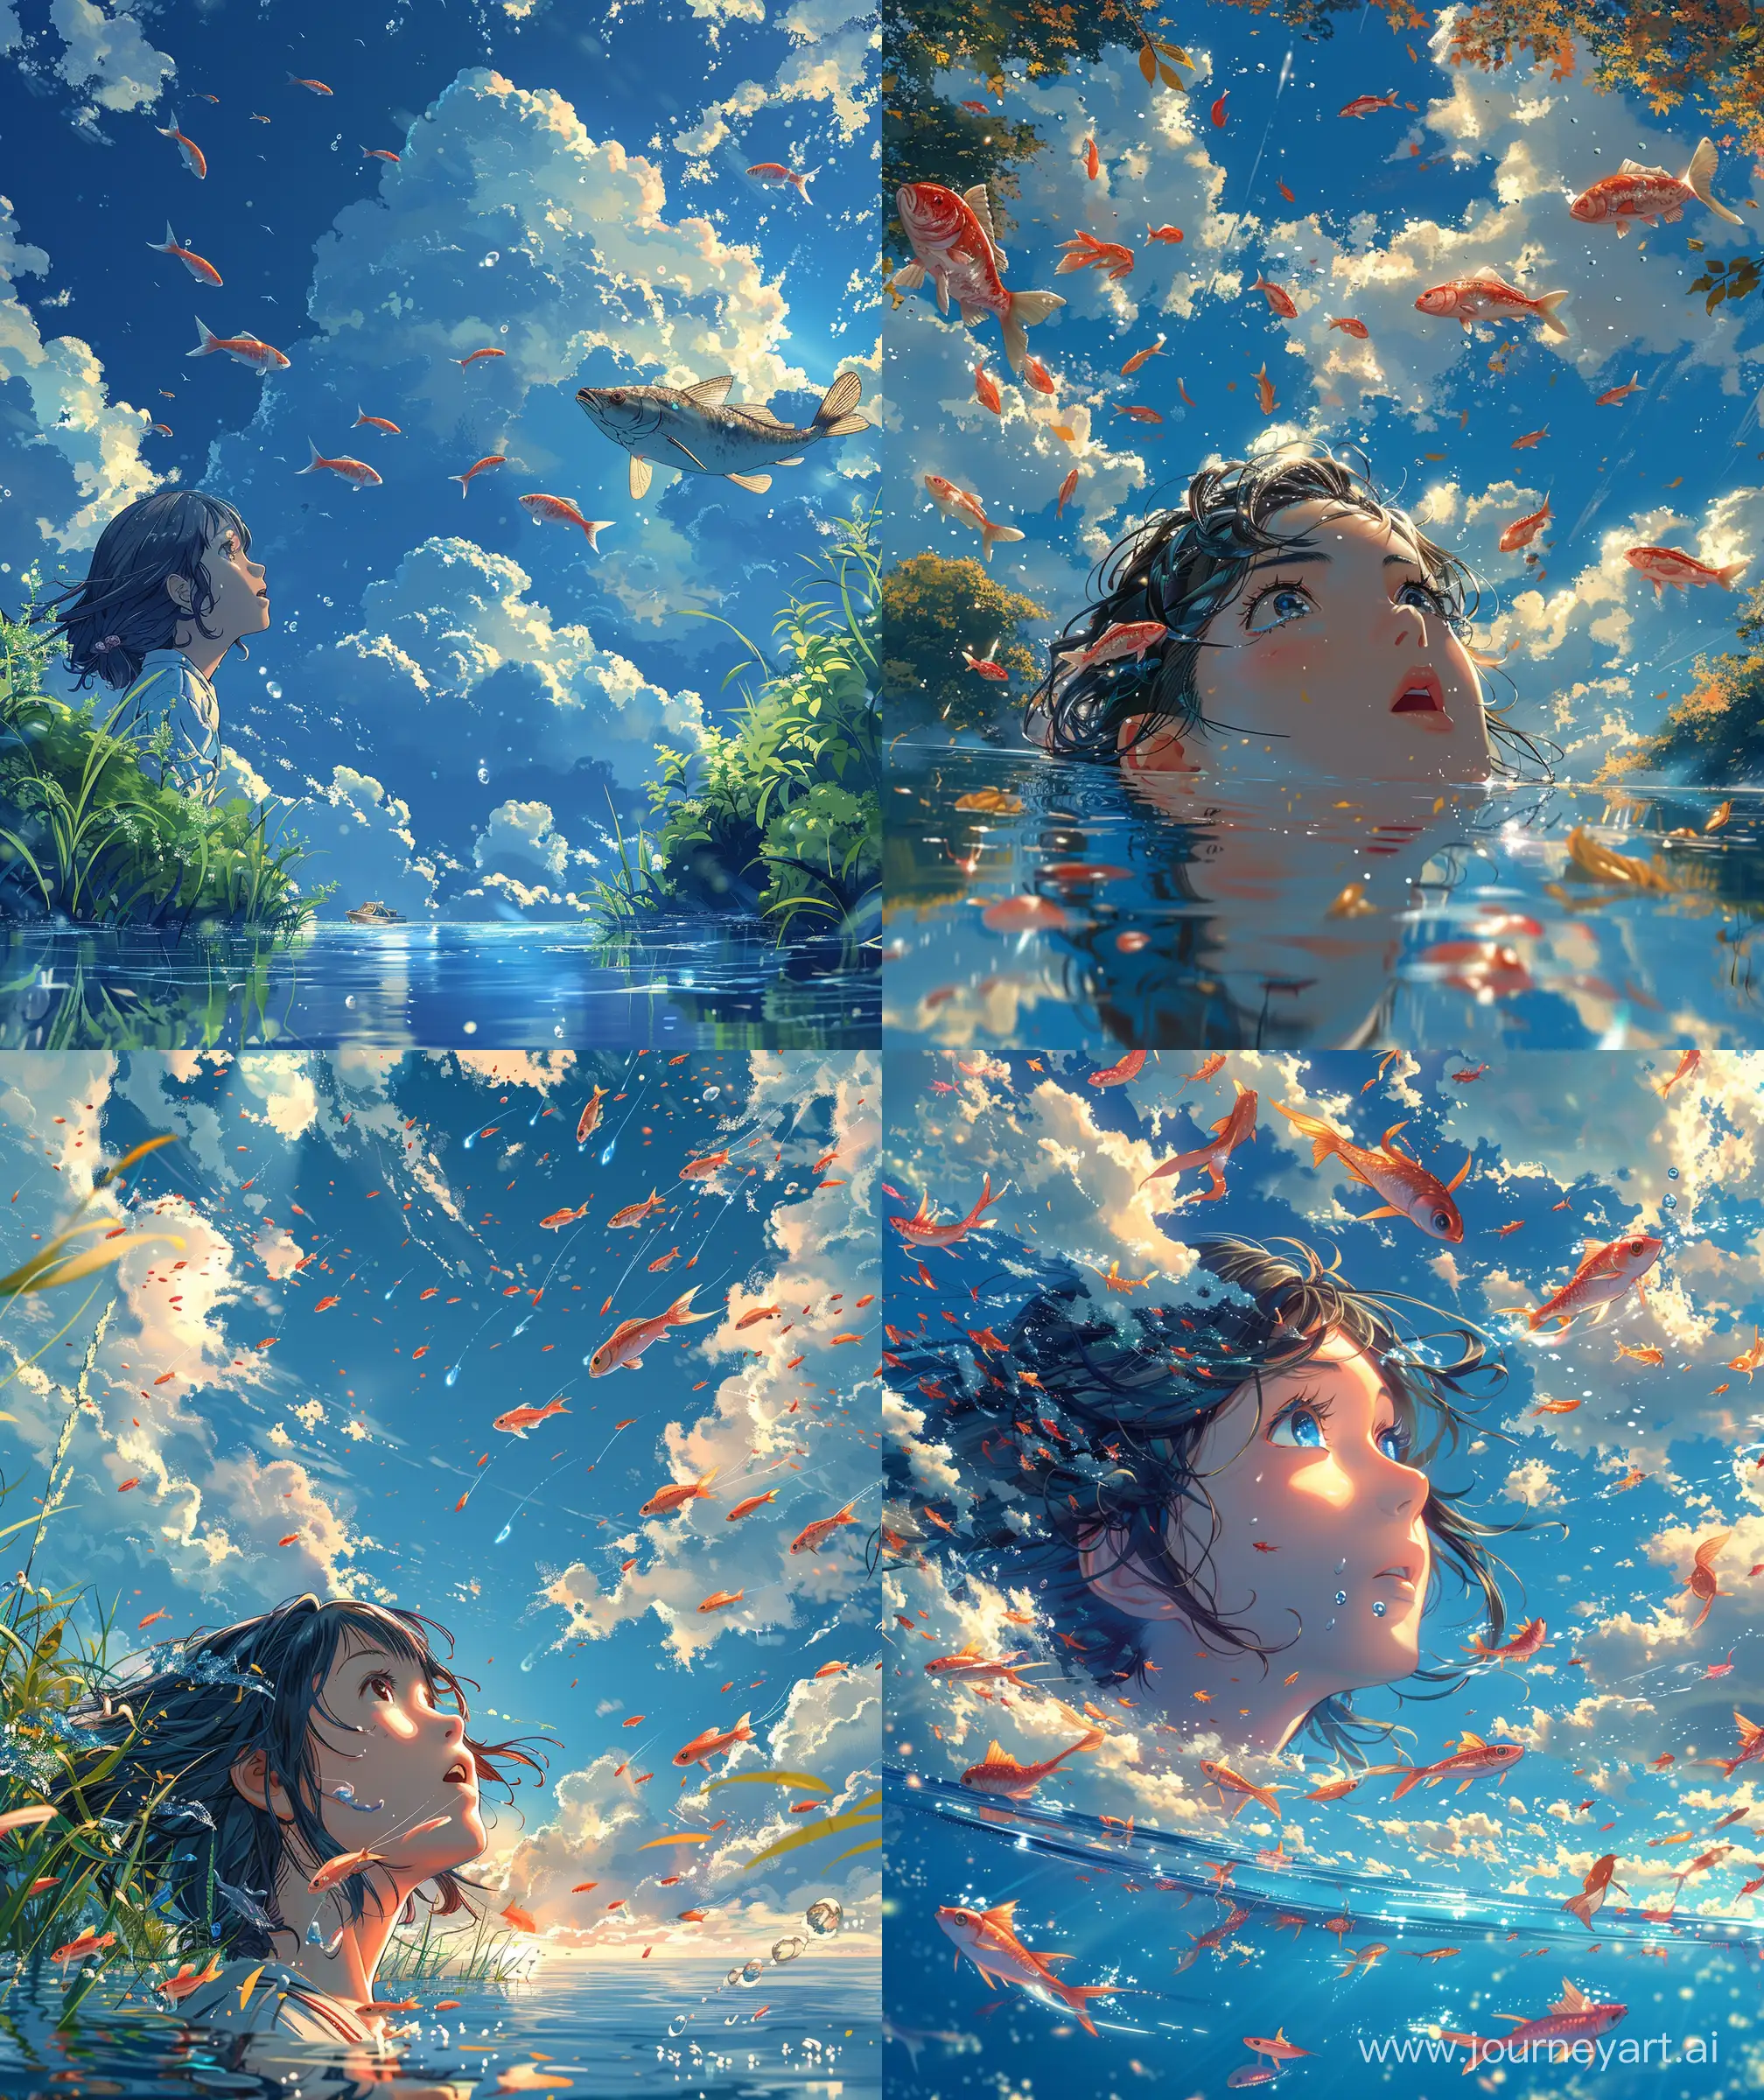 Magical-Sky-Escape-Anime-Style-Cloud-Man-and-Flying-Fish